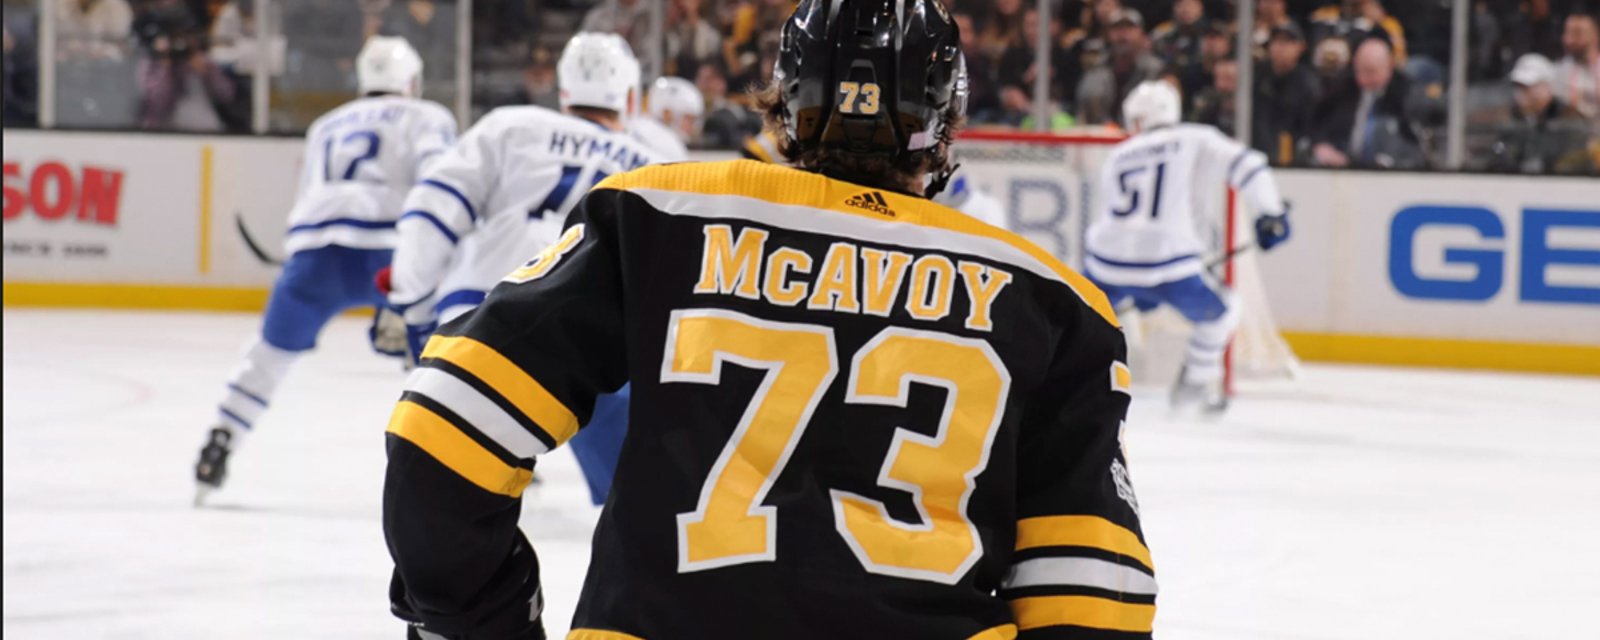 Report: Finally some good news for Bruins’ blueliner McAvoy